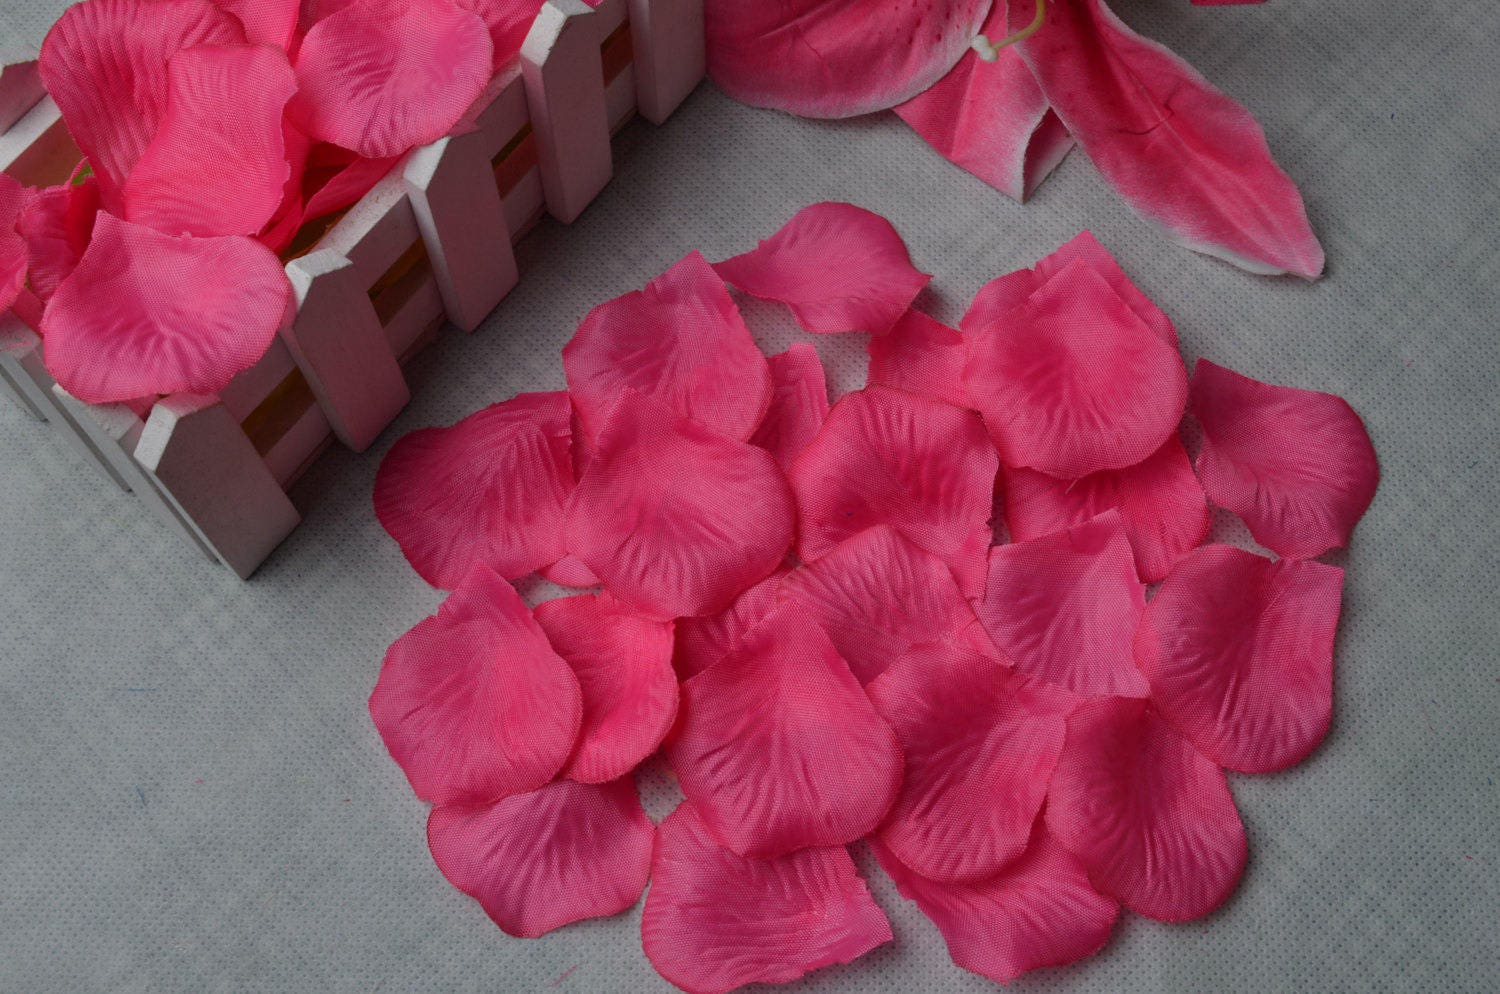 1000 Hot Pink Silk Rose Petals Mothers Day Christening Party Decorations for sale online 